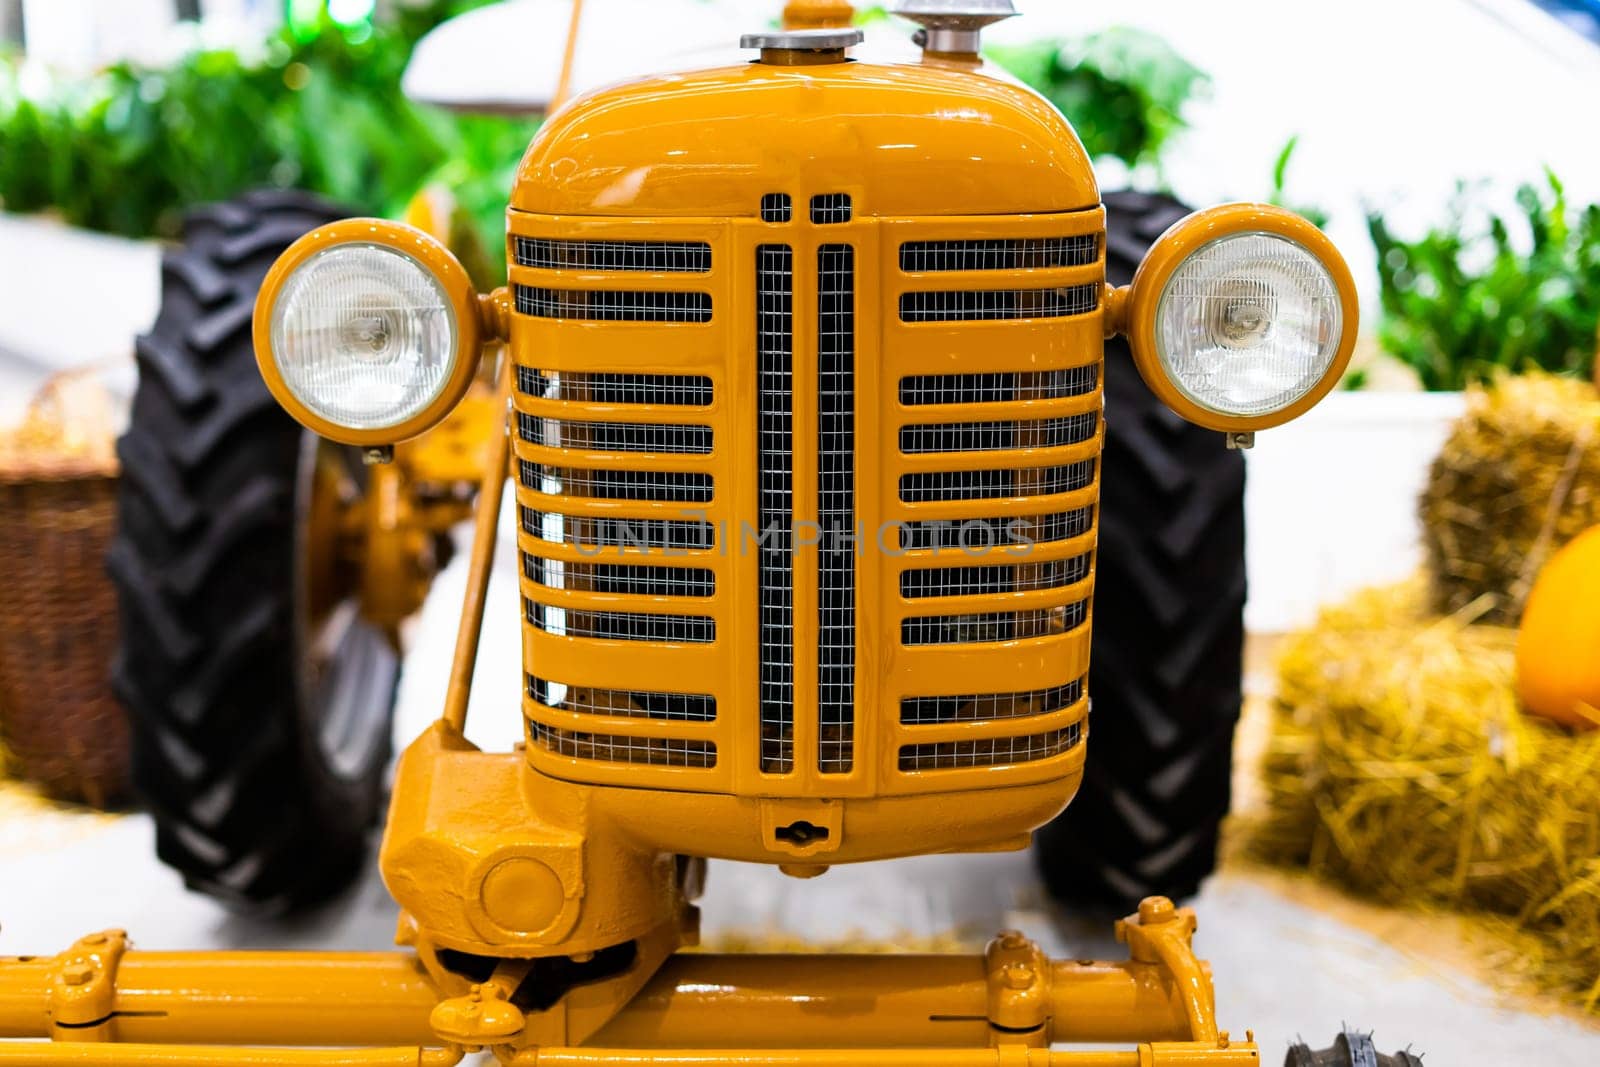 Detail of a small tractor with yellow construction tracks, Caterpillar Ten by Zelenin